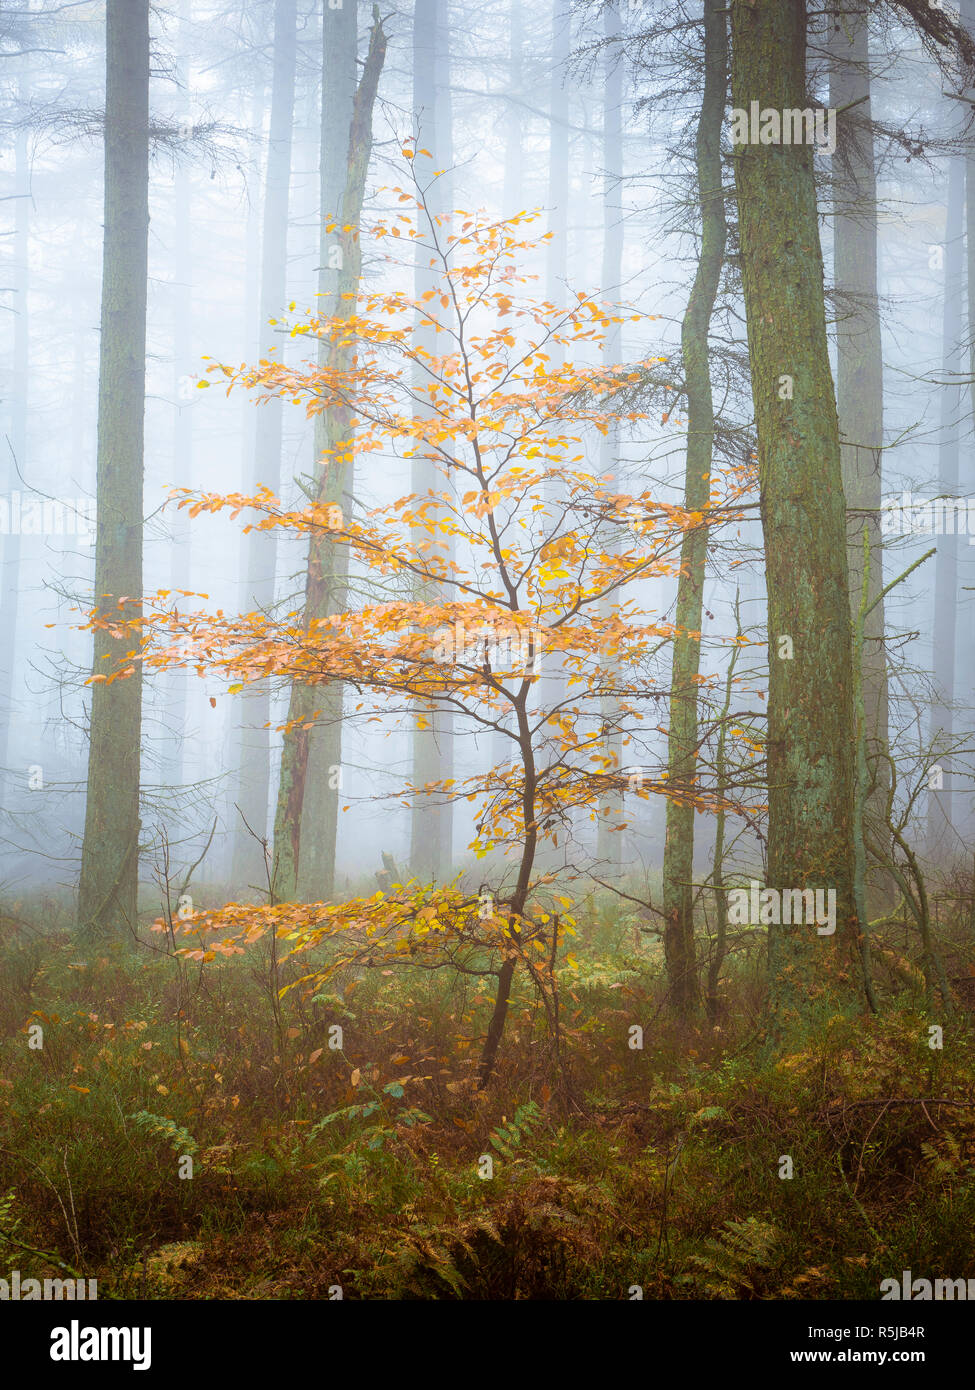 One of the last trees with yellow leaves left in a misty woodland. Stock Photo